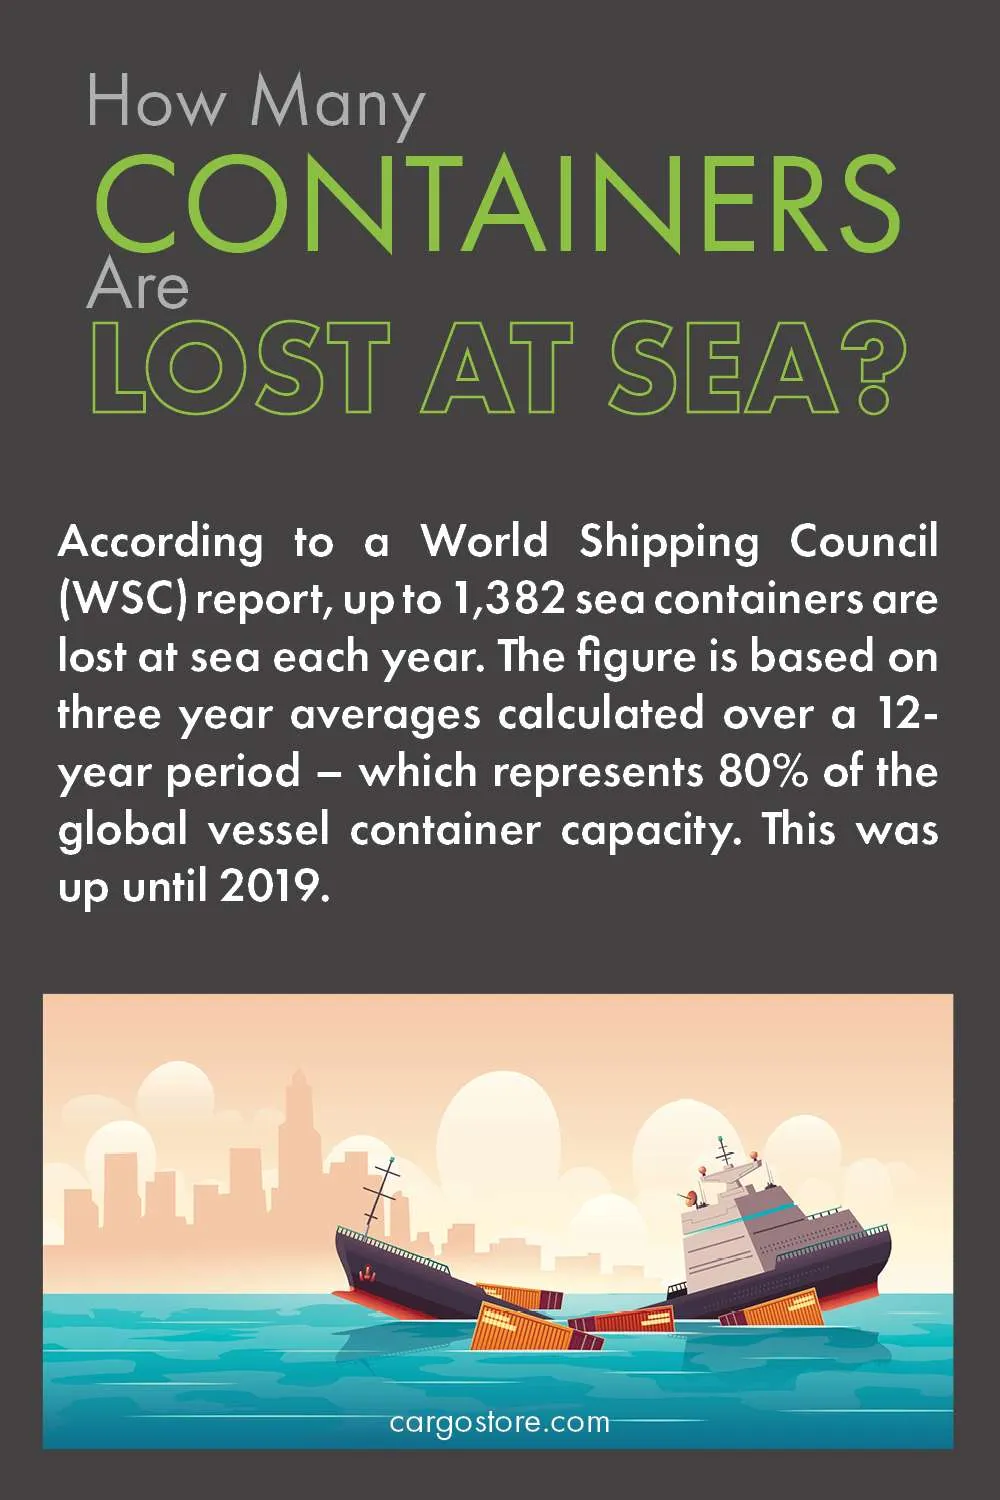 Containers Lost At Sea - Cargostore